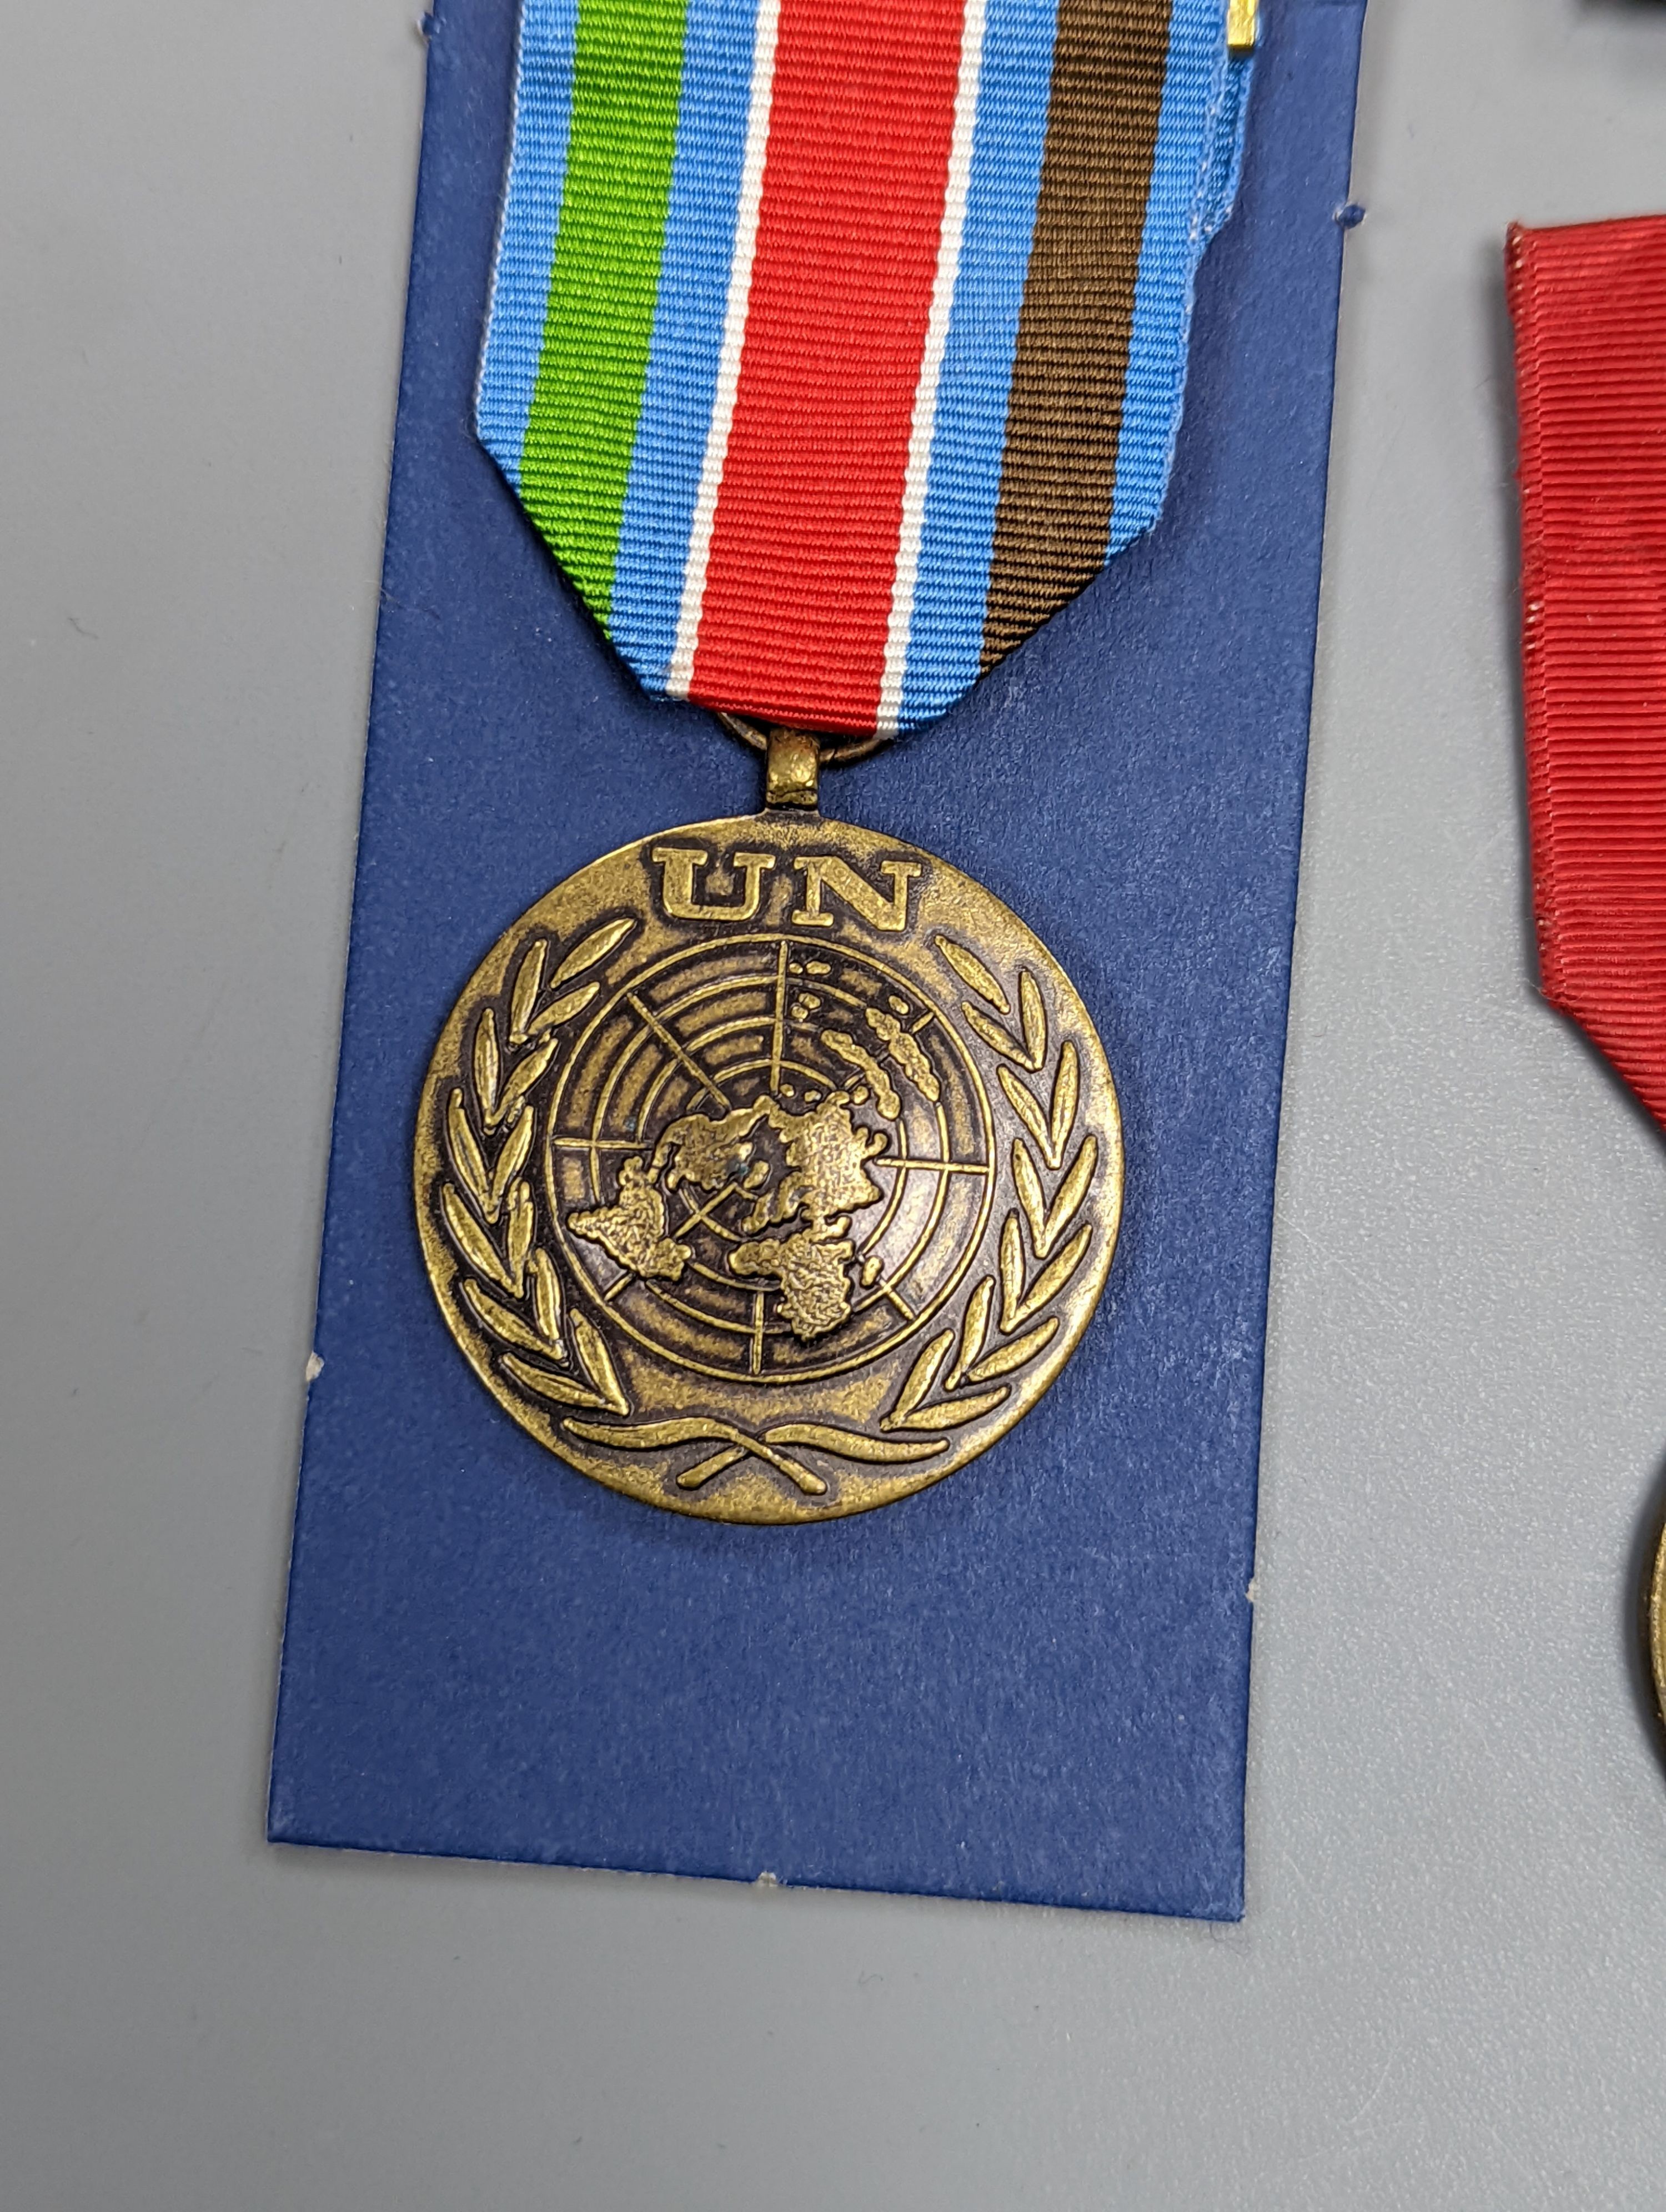 A George VI Territorial For Efficient Service medal, ARP, On War Service, Women’s Land Army badges, UN medal and other badges and medals and a quantity of reference books